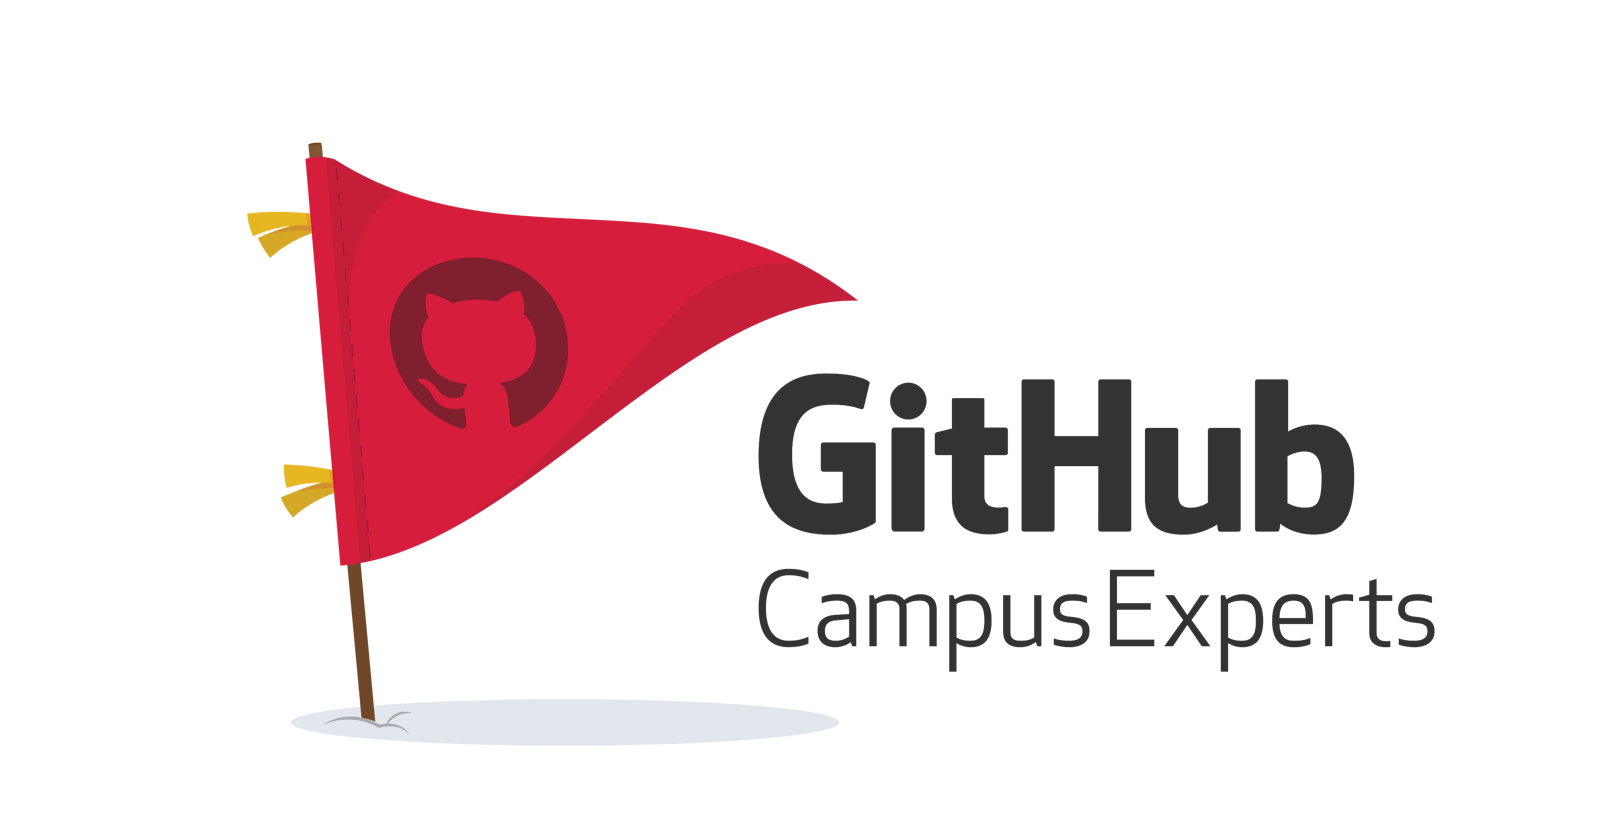 Become the next generation of GitHub Campus Expert 🚩